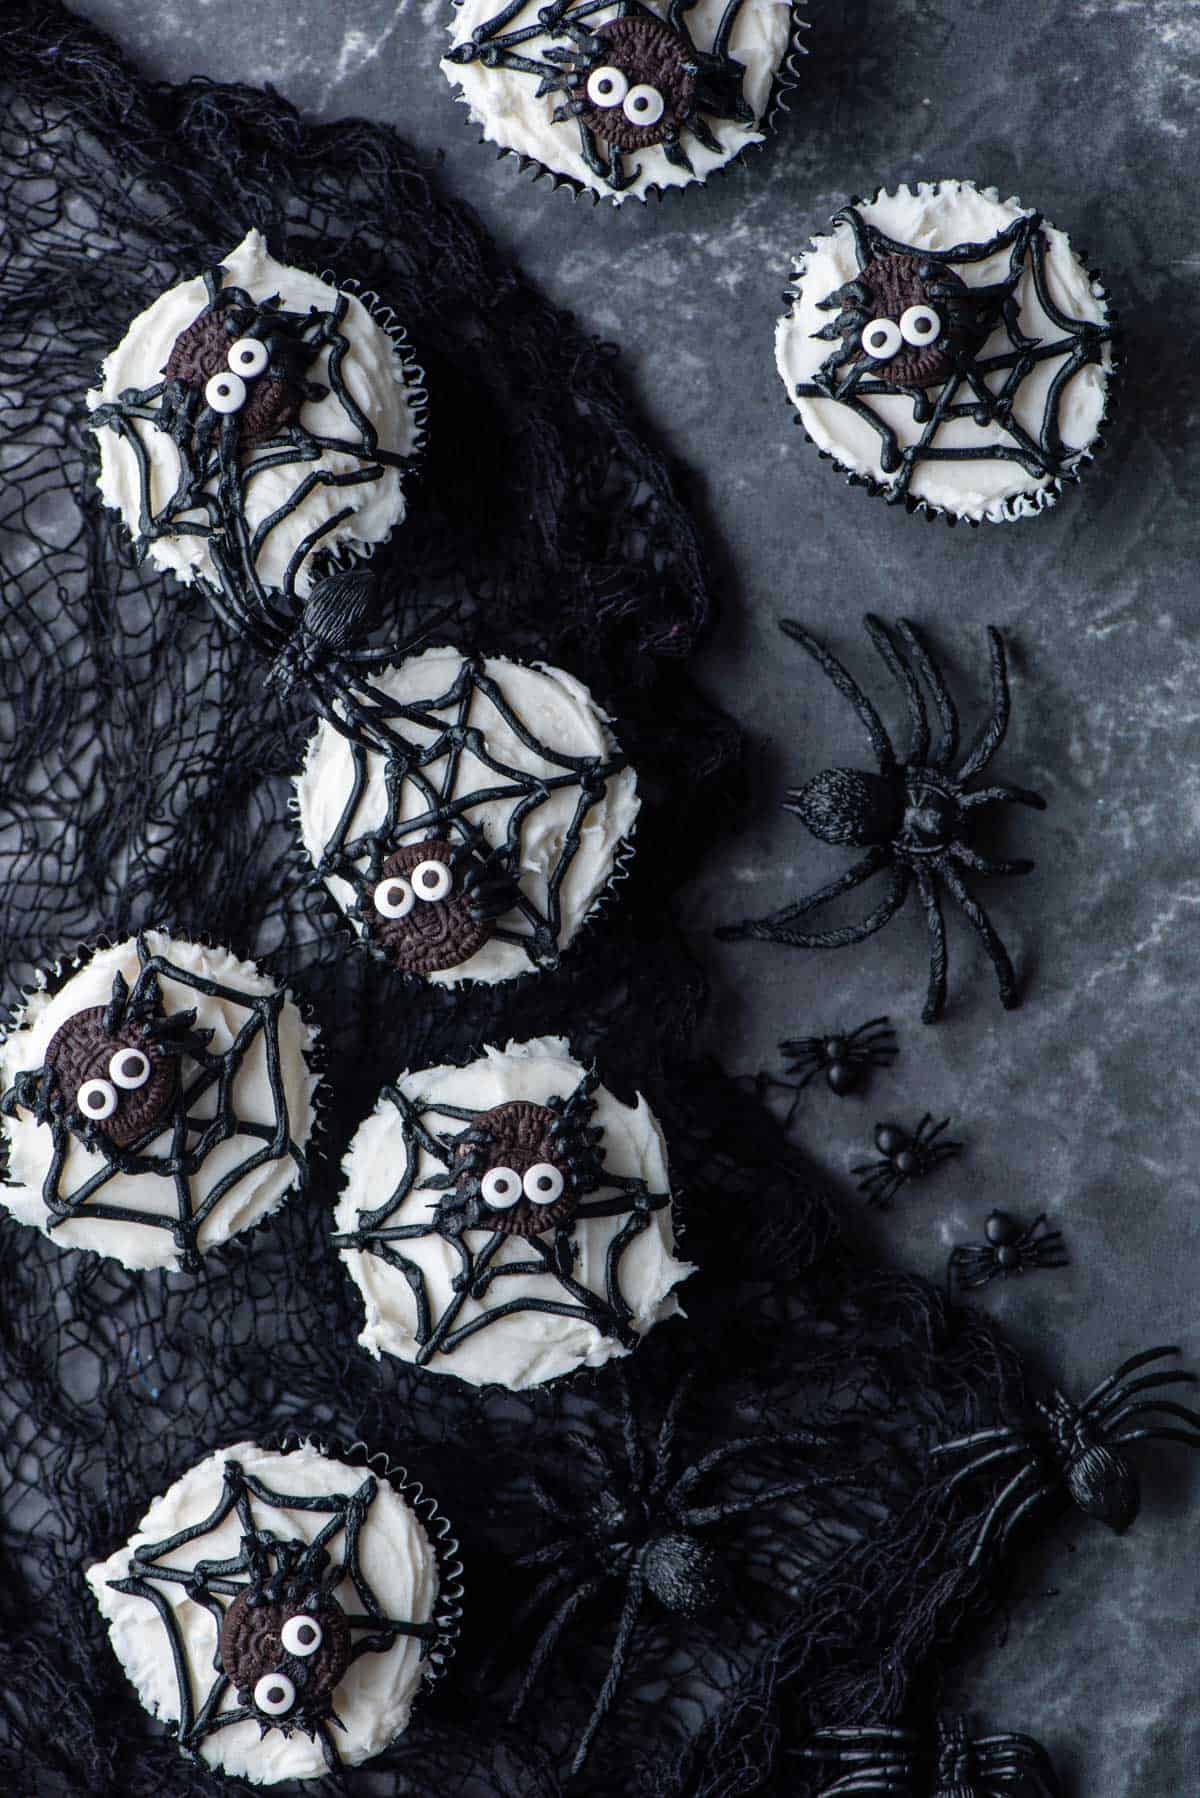 spider web cupcakes arranged on and around a black netting with plastic spiders scattered around